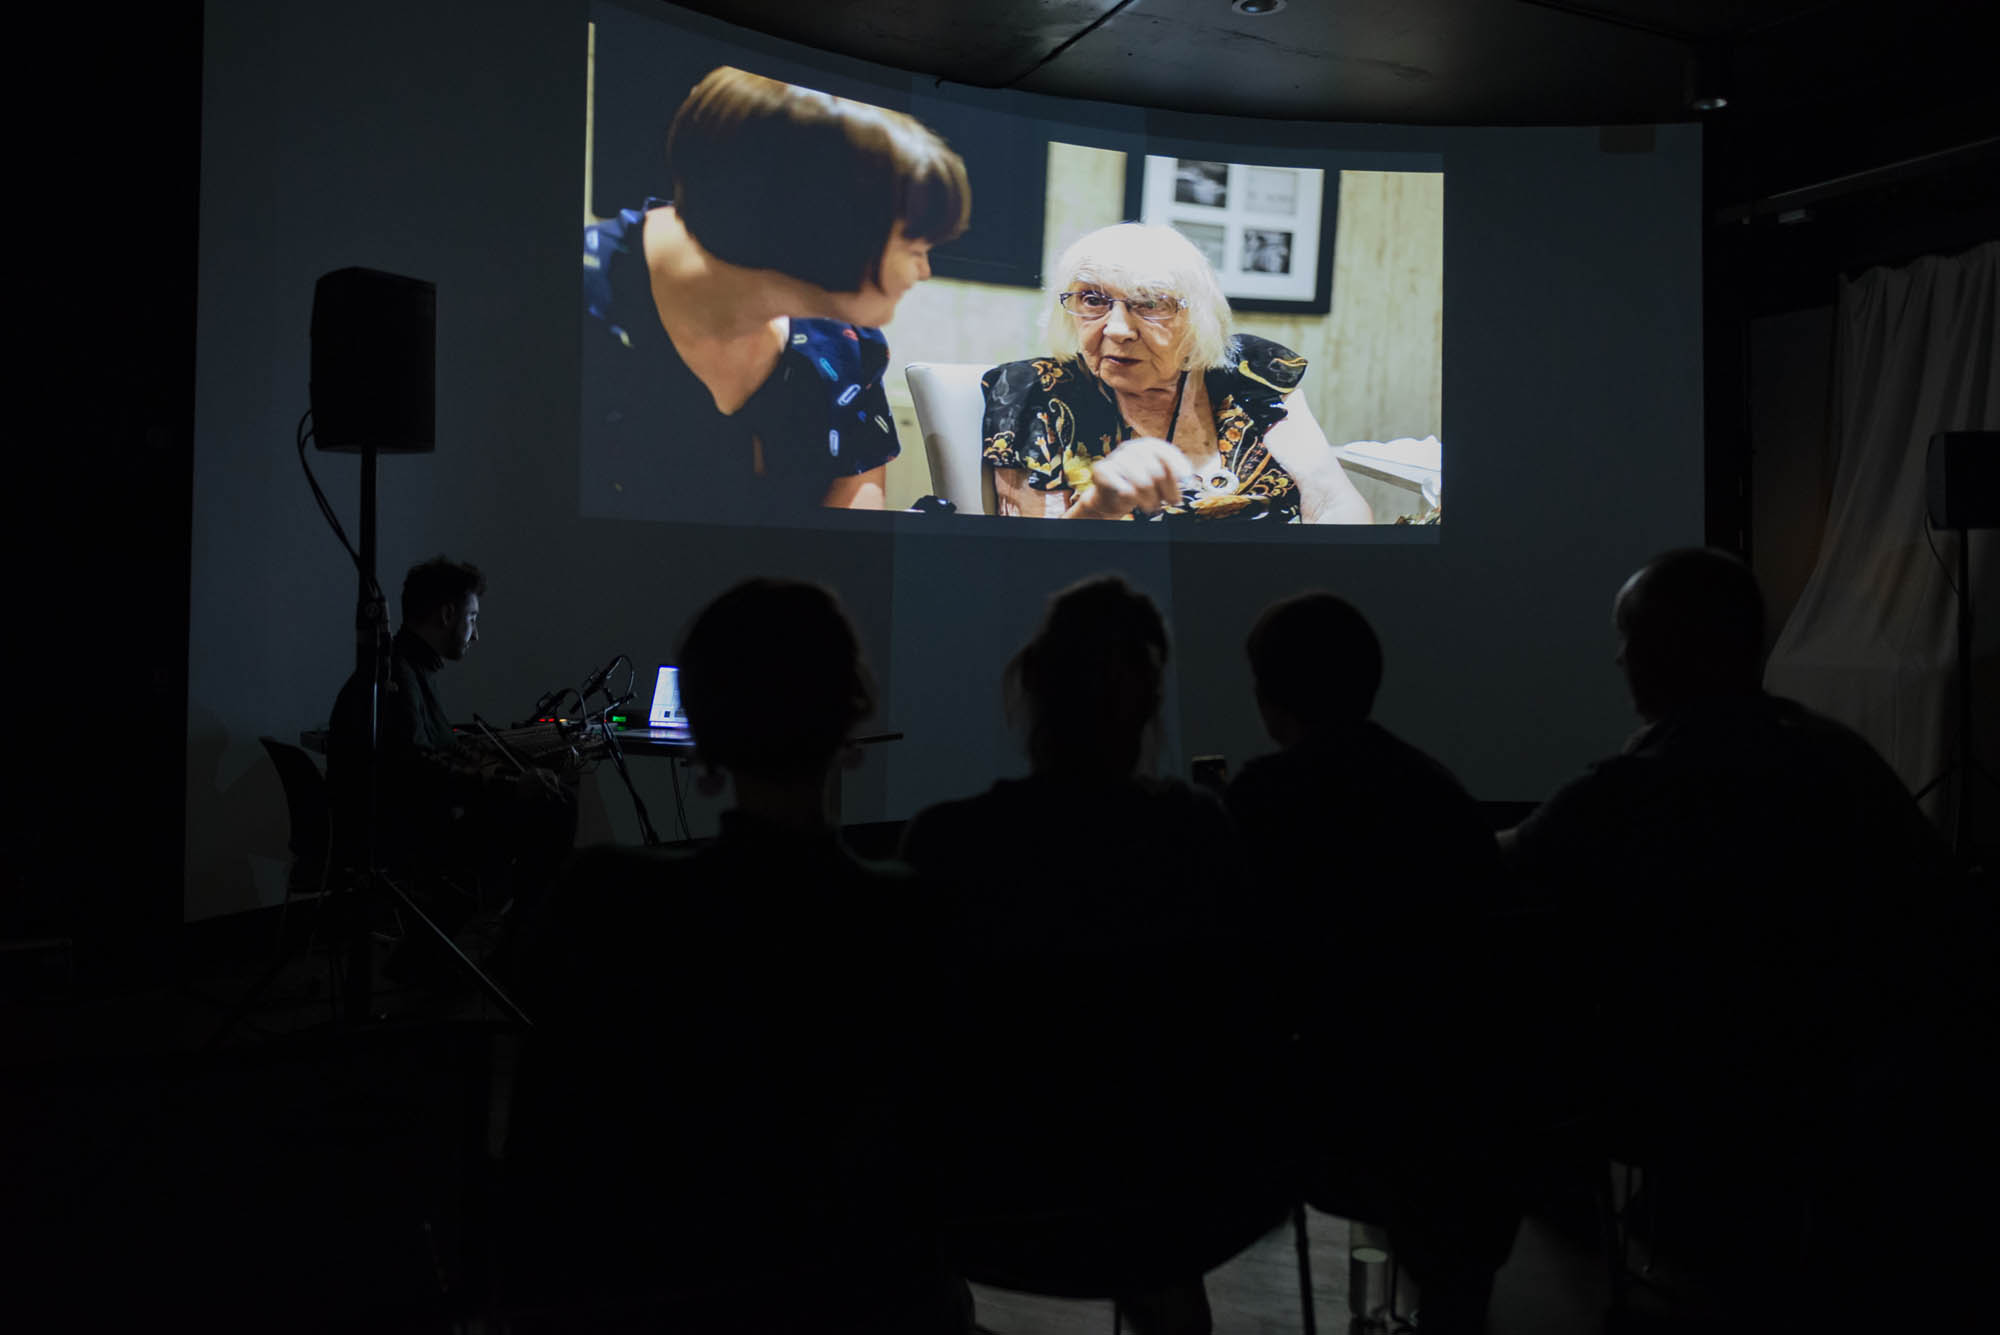 A photograph of a darkened space with the silhouettes of audience visible and the artist on screen speaking with an elderly woman.